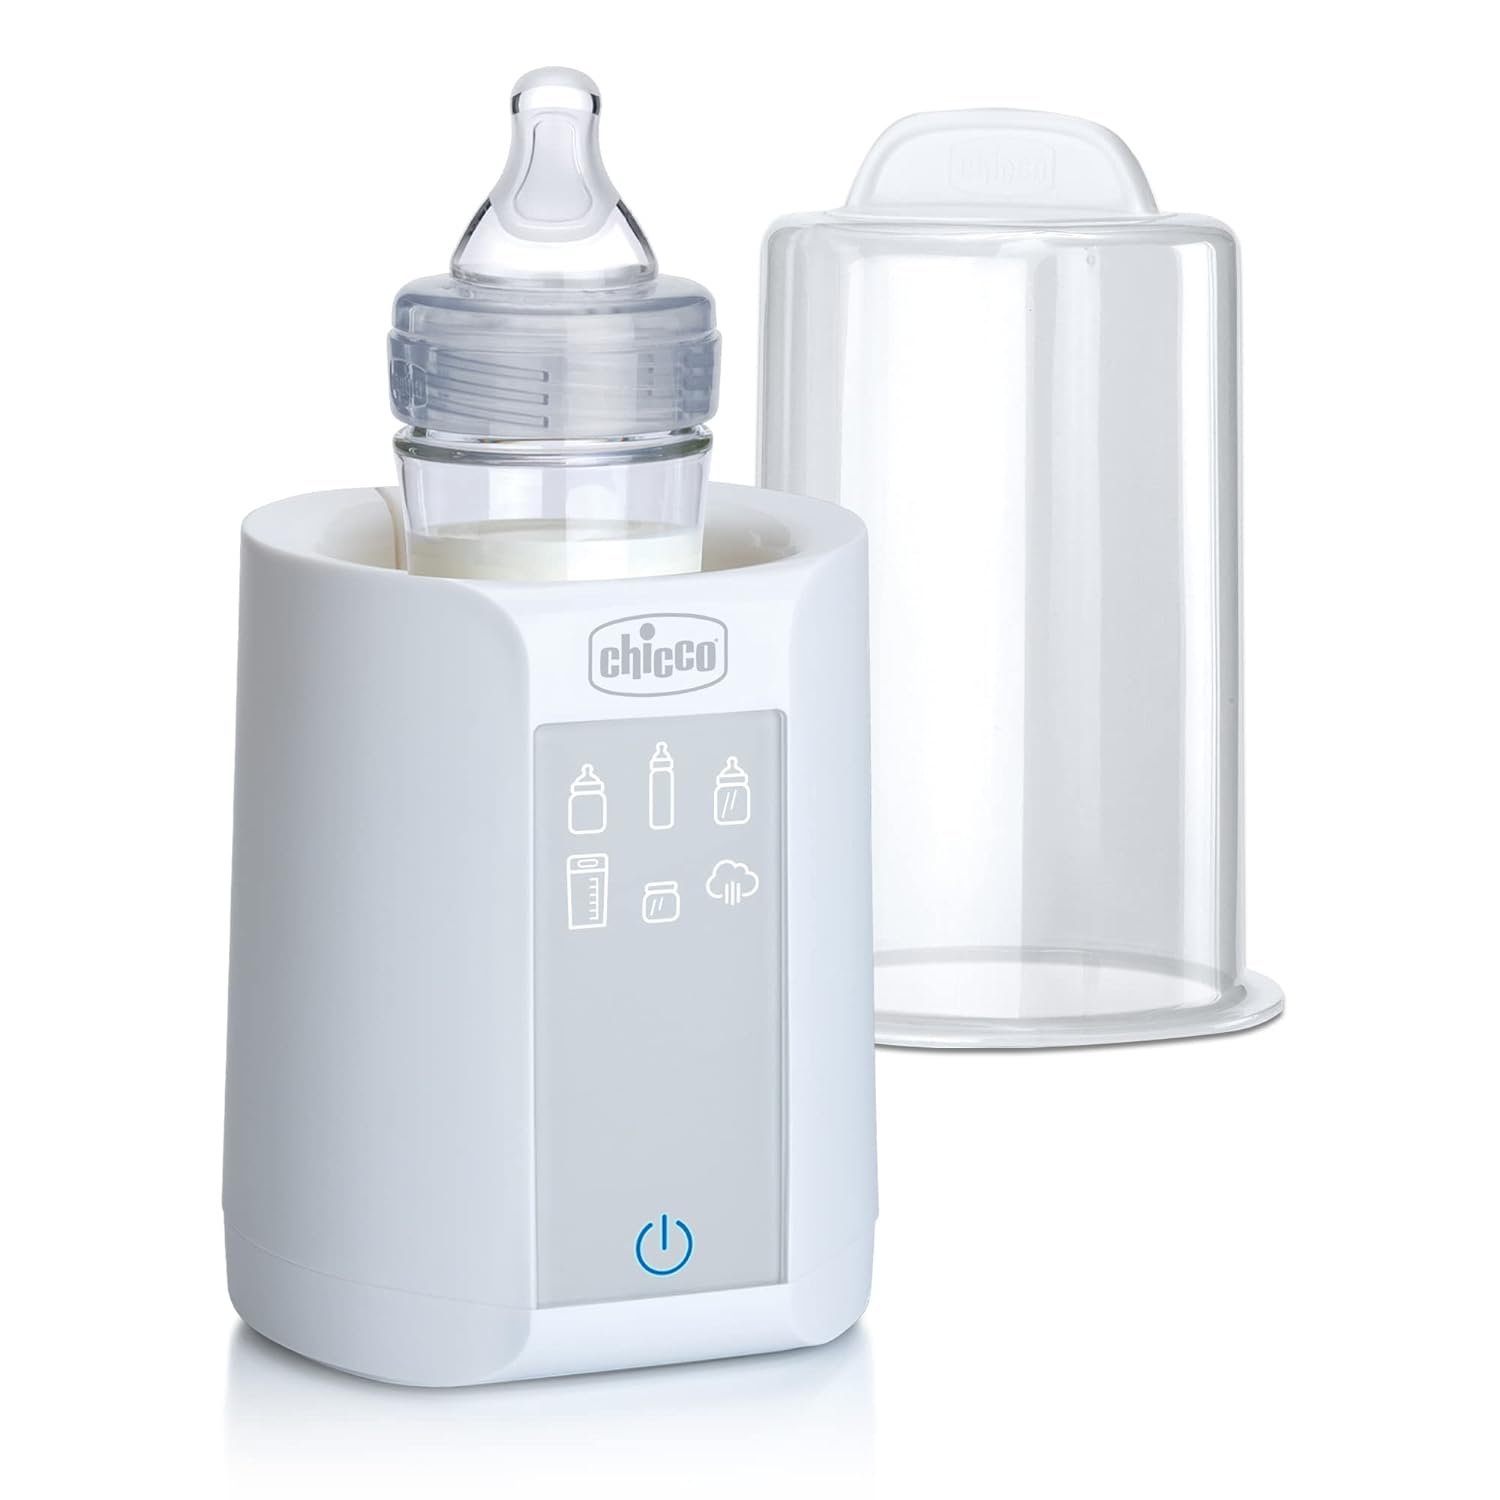 Chicco Digital Bottle Warmer  Sterilizer for Baby Bottles, Baby Food Jars, and Milk Bags | Eliminates 99.9% of Germs | 4 Heating Options | Digital Touchscreen| Automatic Shut-Off  Sound Alert